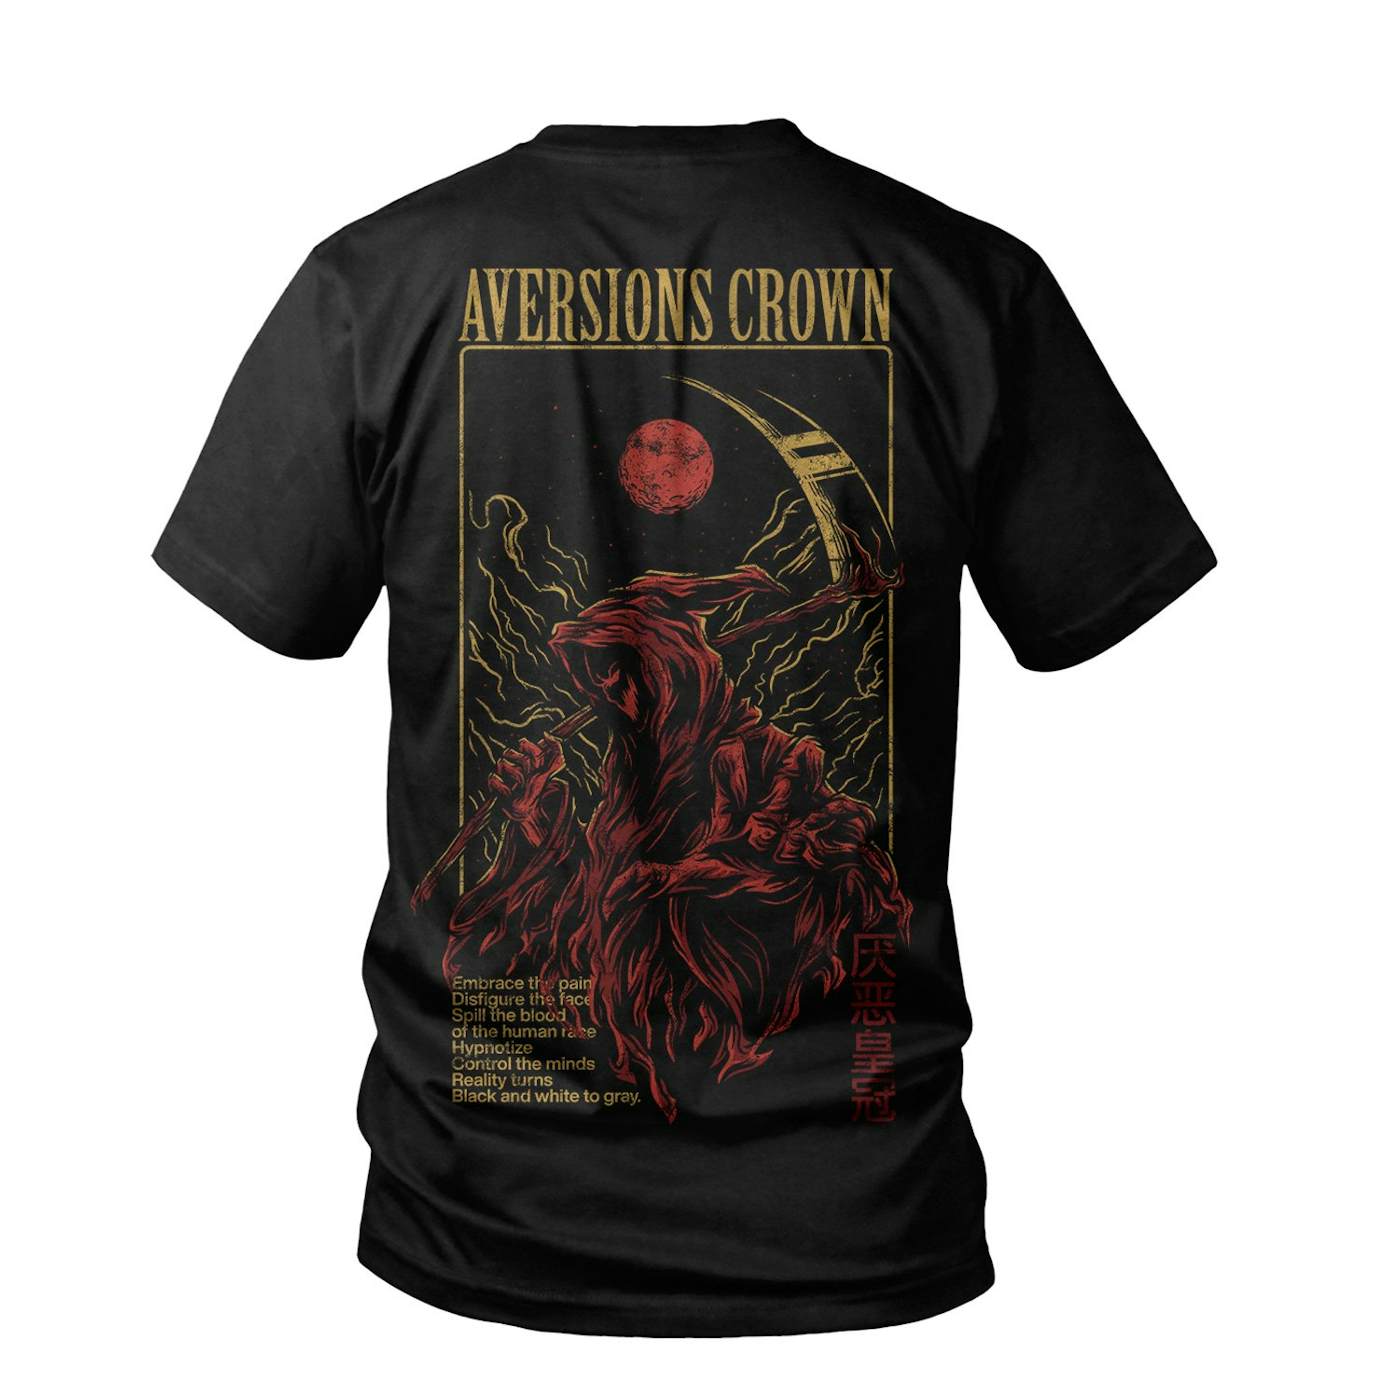 Aversions Crown "Red Reaper" T-Shirt